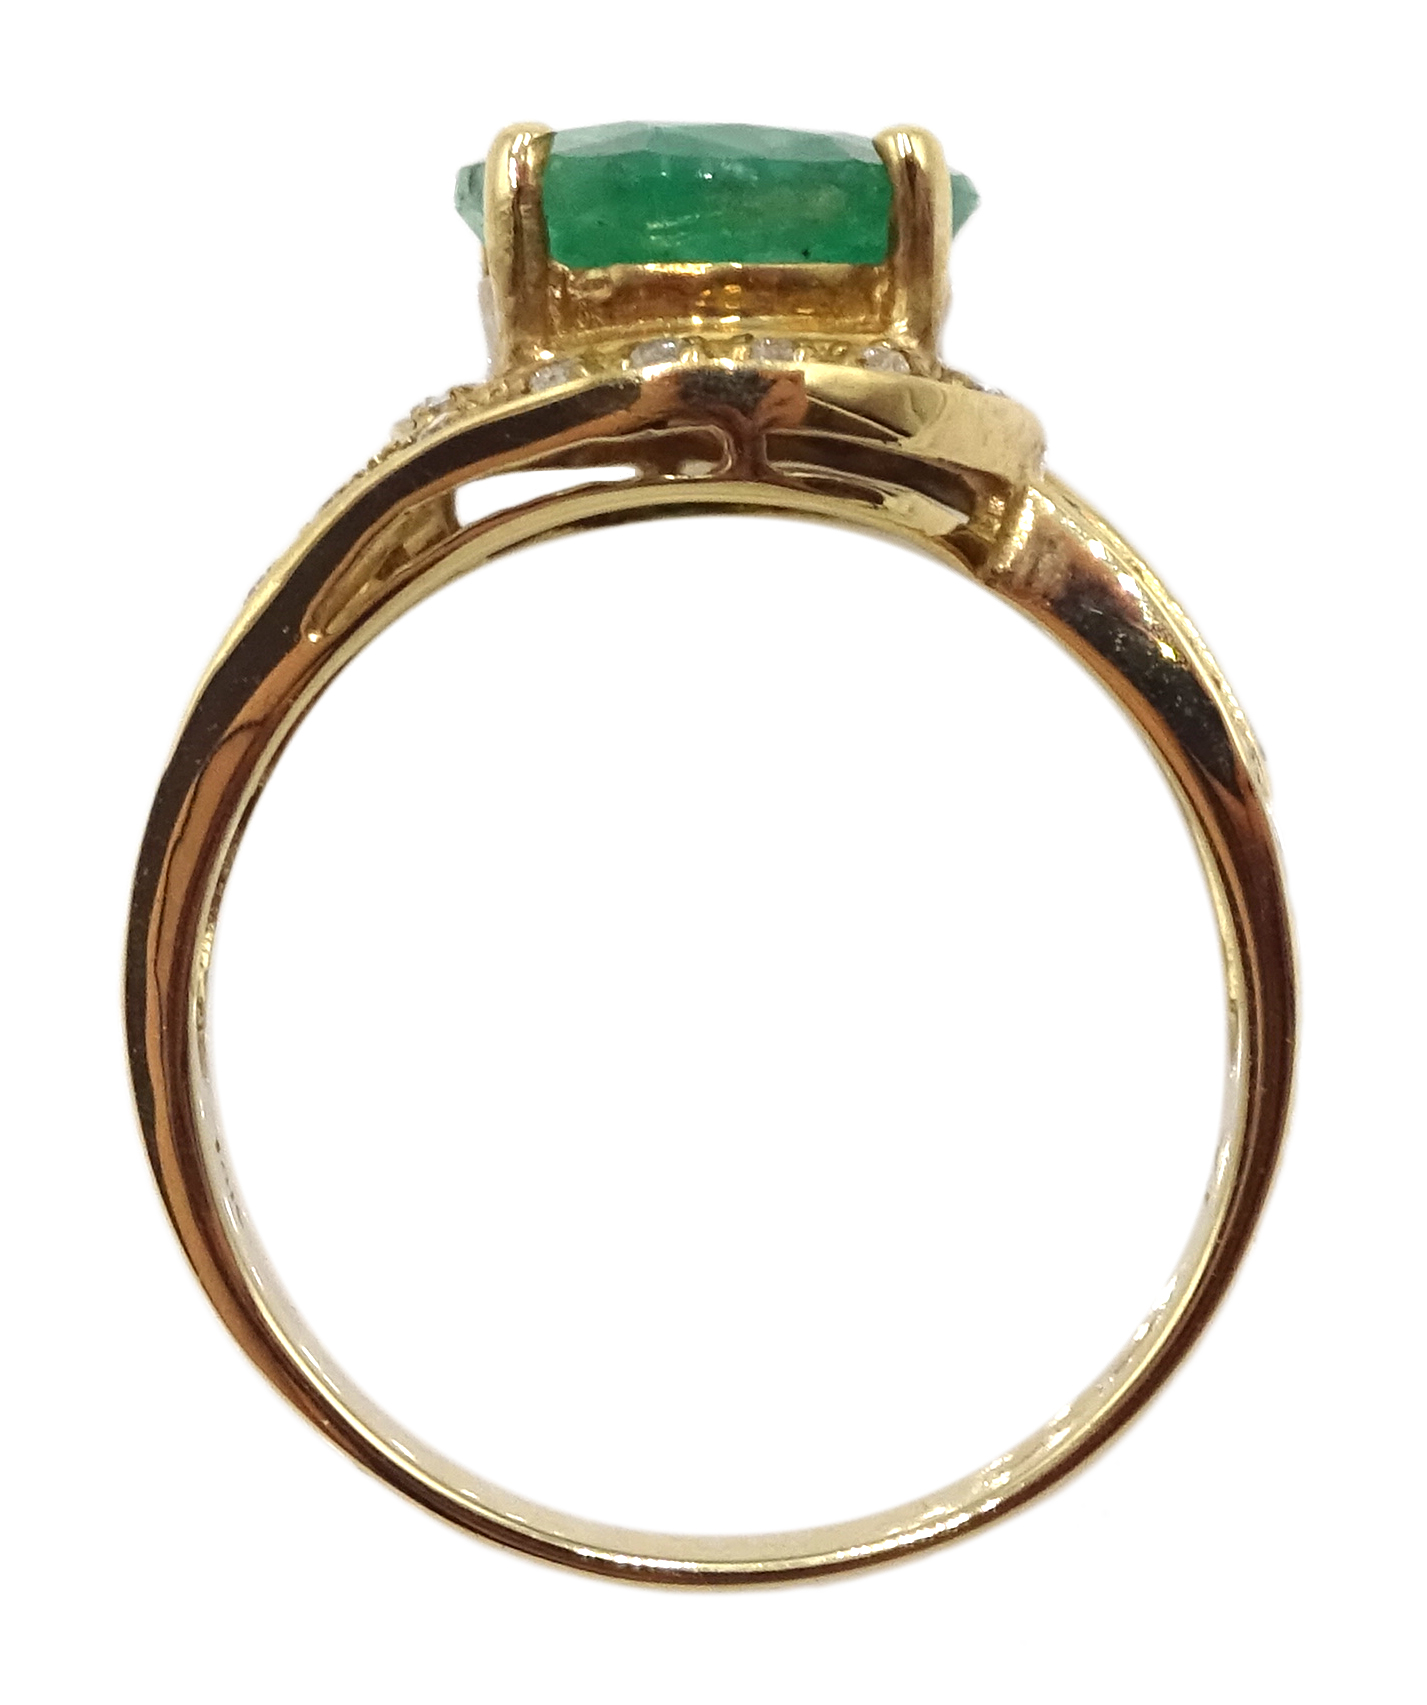 Gold oval emerald ring with diamond swirl surround and shank, stamped 14K - Image 8 of 8